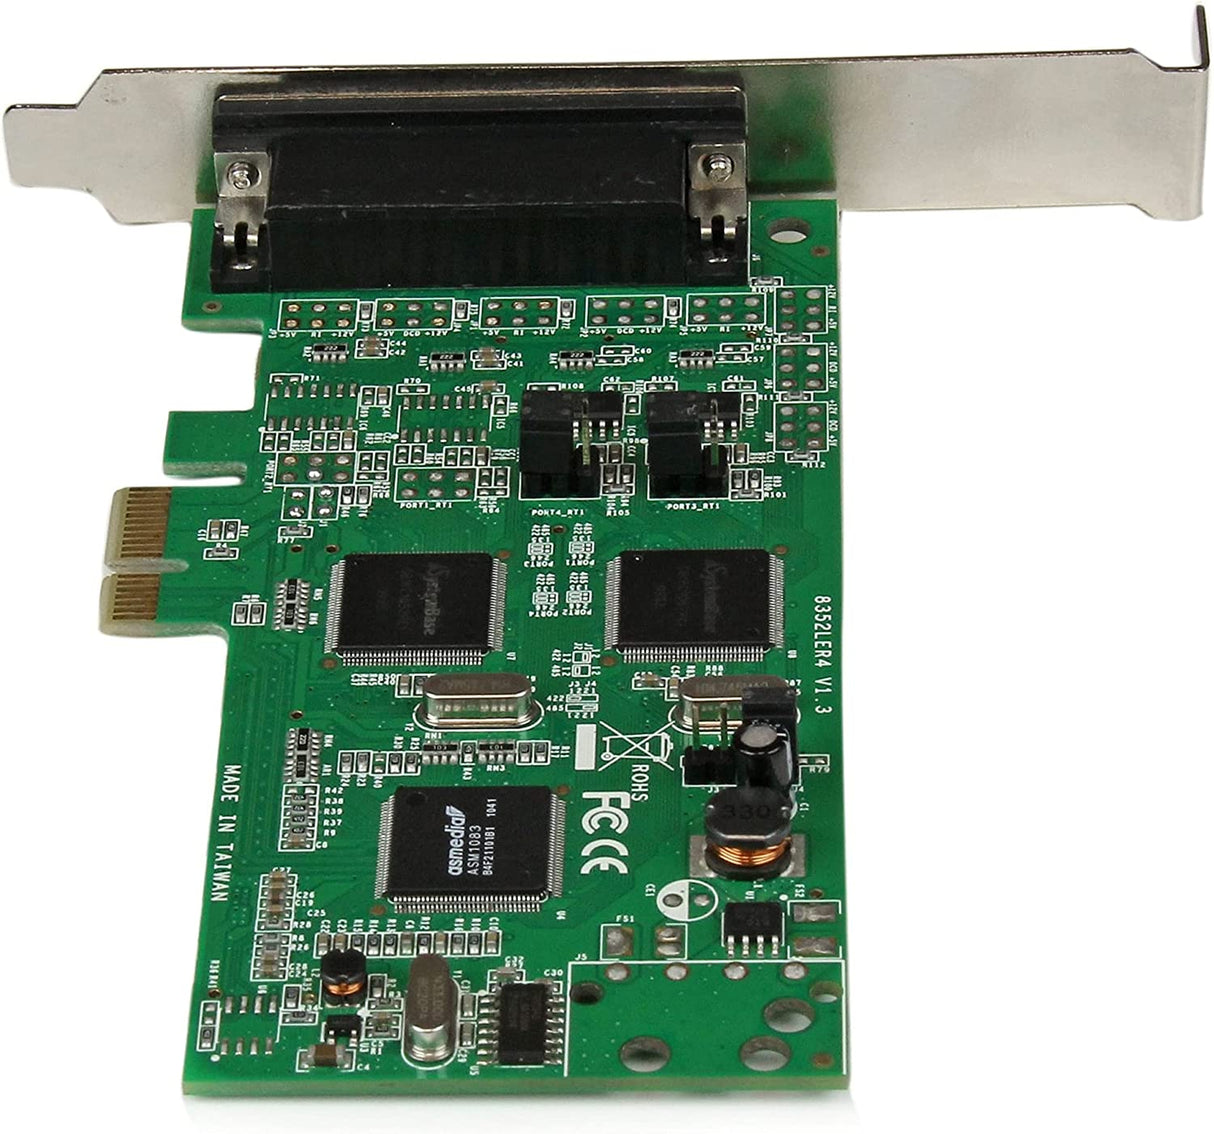 StarTech.com 4 Port PCI Express PCIe Serial Combo Card with Breakout Cable - 2 x RS232 2 x RS422 / RS485 - Dual Profile (PEX4S232485)